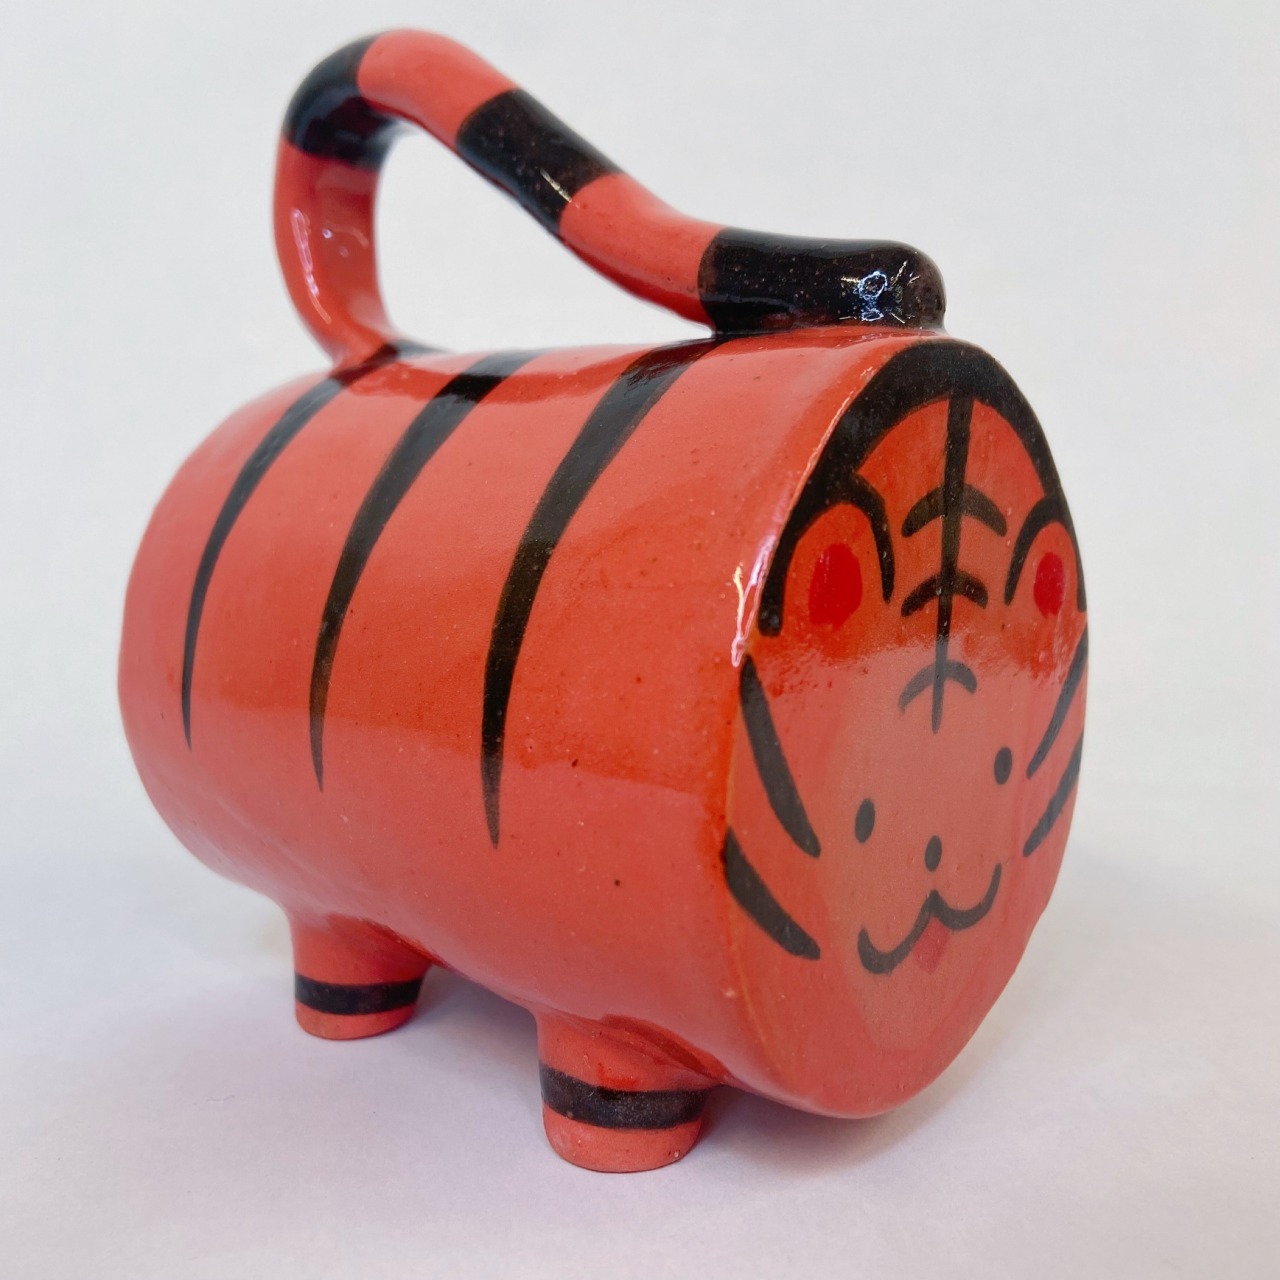 Photo of handmade ceramic tiger mug. It is red-orange with black stripes. The handle of the mug is the tail, and the bottom of the mug is the face. On the other side of where the handle is, there are four feet so the mug can stand up sideways.